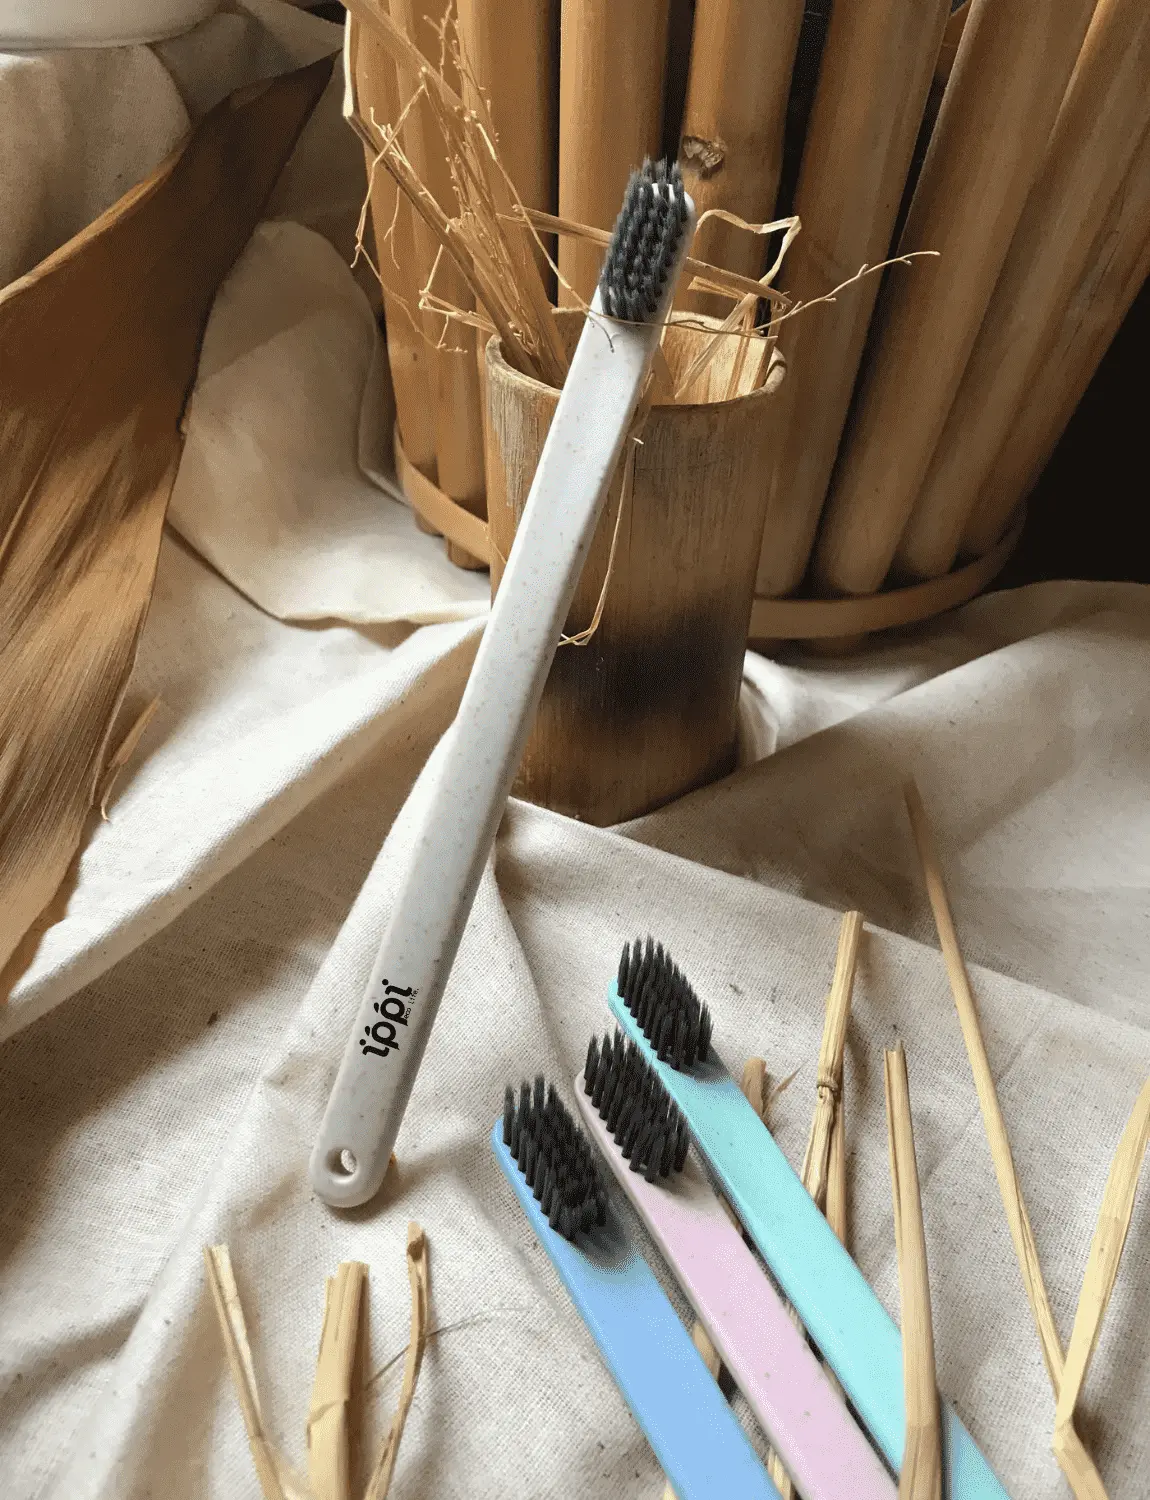 best ecofriendly products in kerala india ecofriendly toothbrush